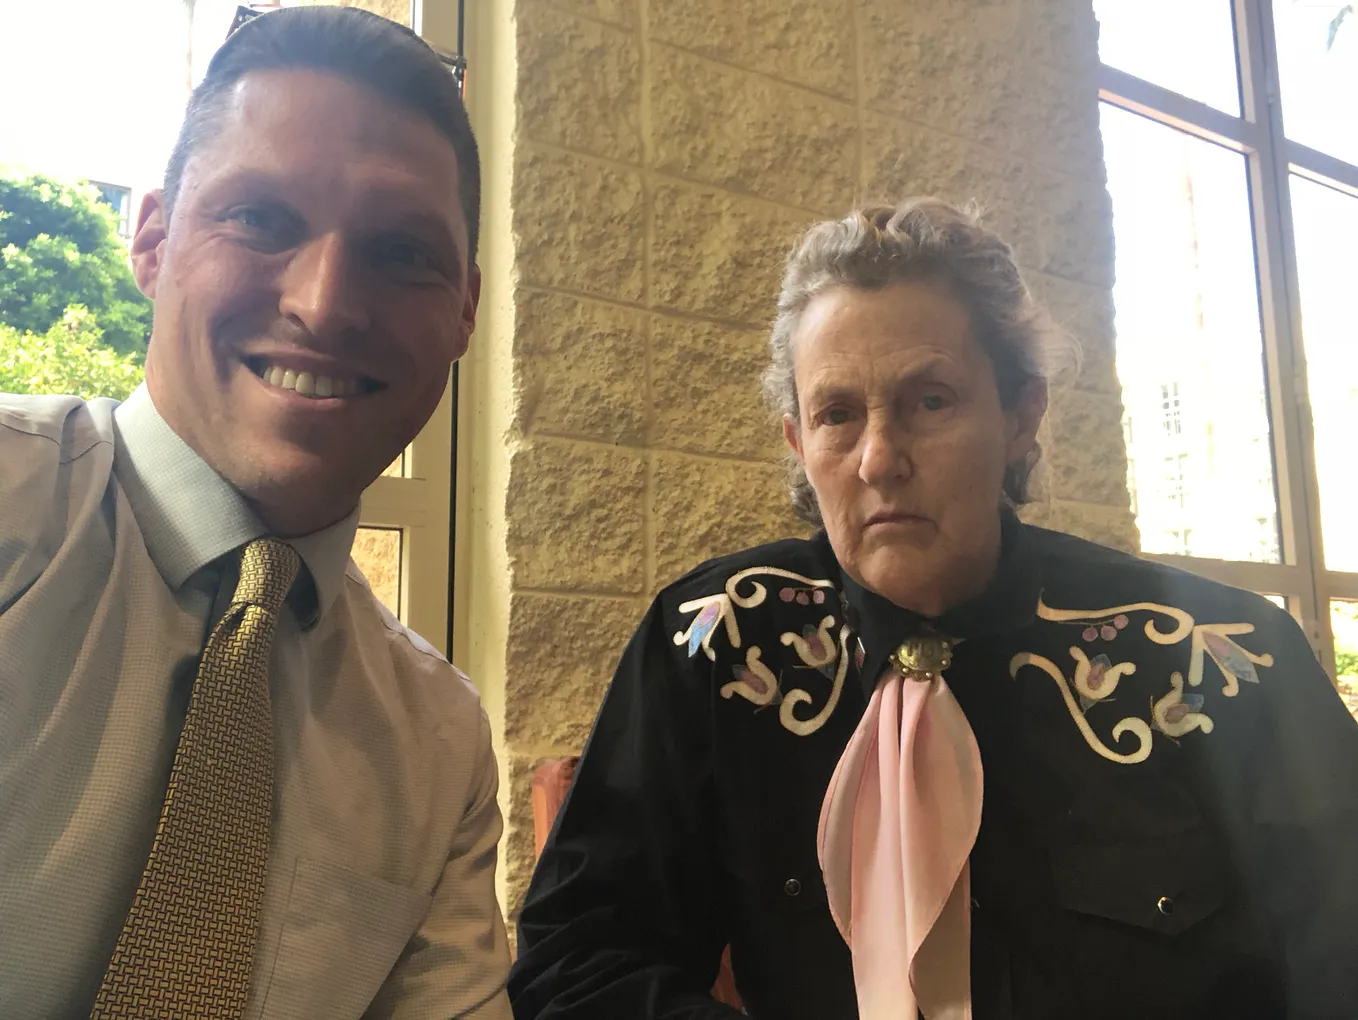 Improving Animal Treatment in Slaughterhouses: An Interview with Dr. Temple Grandin